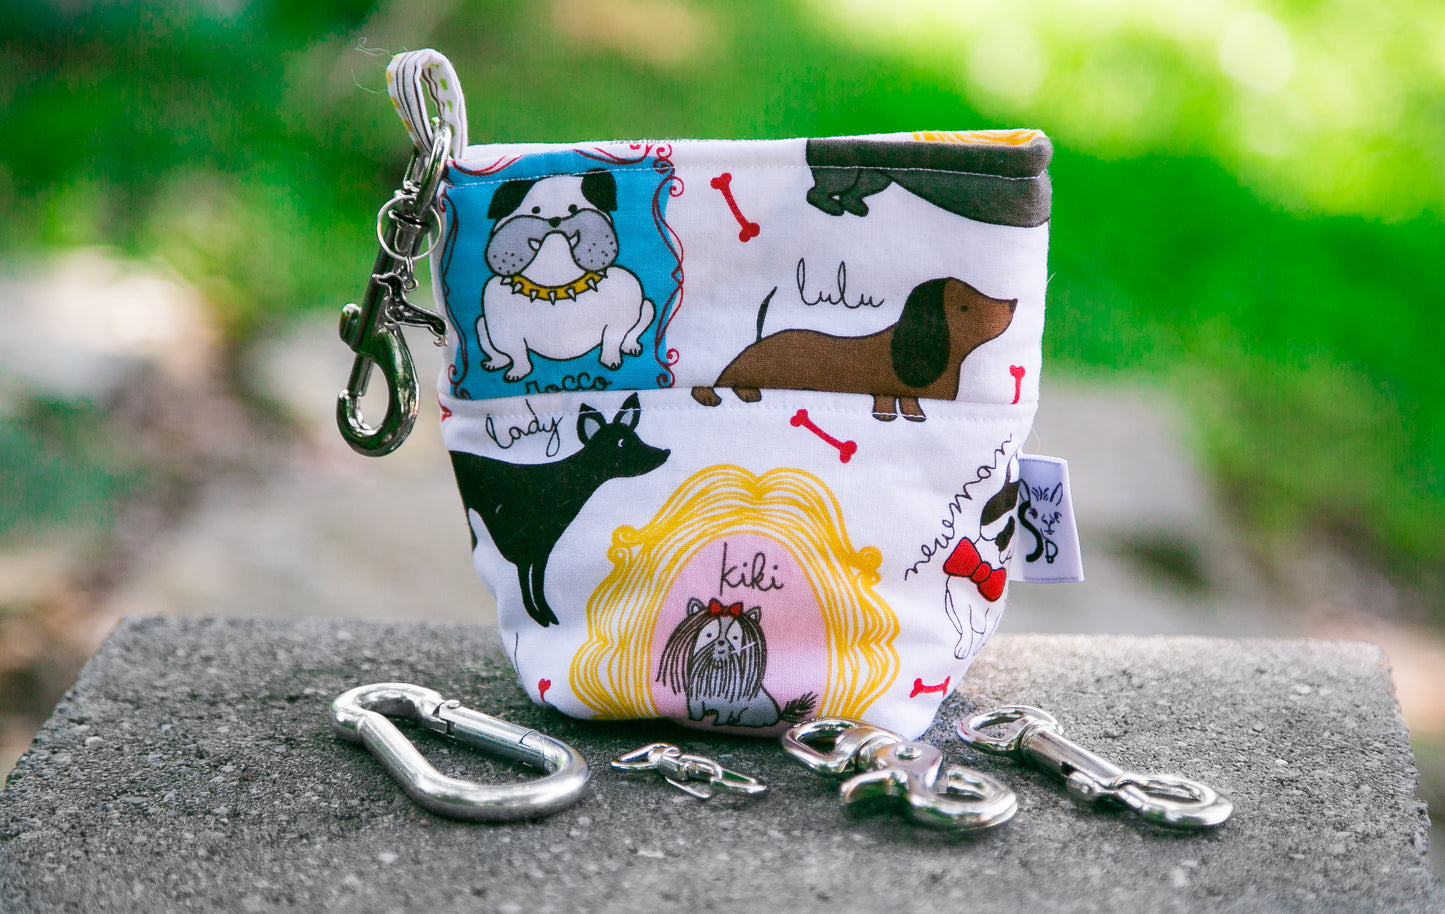 Fun Premium Treat and Pickup Bags Carry Pouch Food Safe Waterproof Lining Choice of Clasps Dog Lover Words OUT OF PRINT